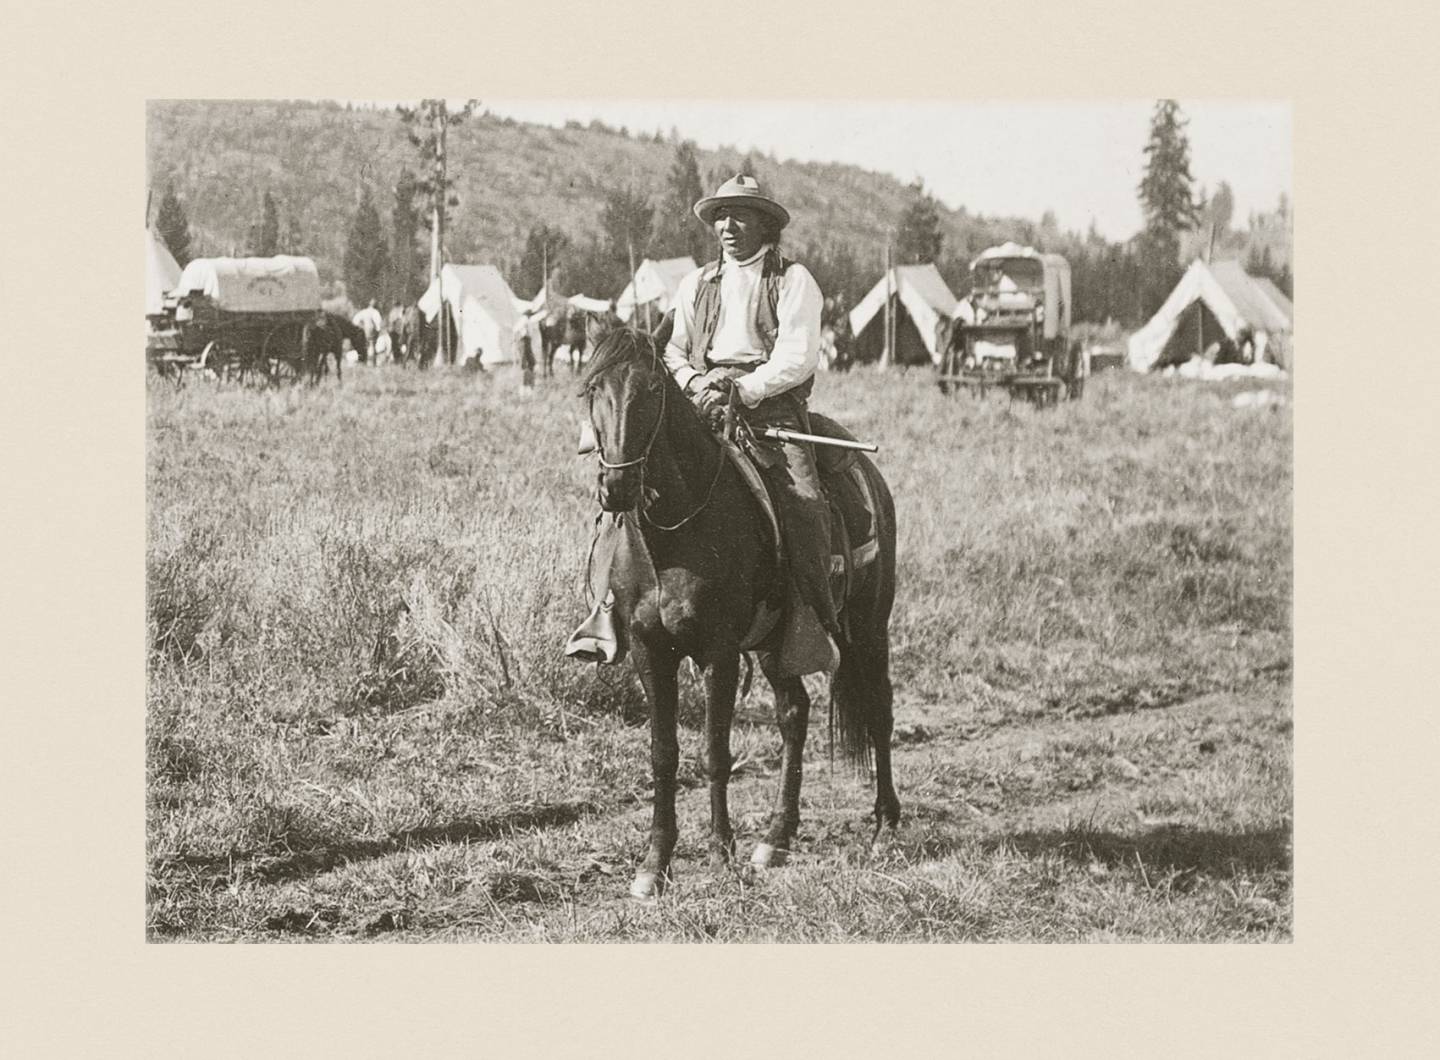 A man sits on a horse with a settlement of tents and mountains behind